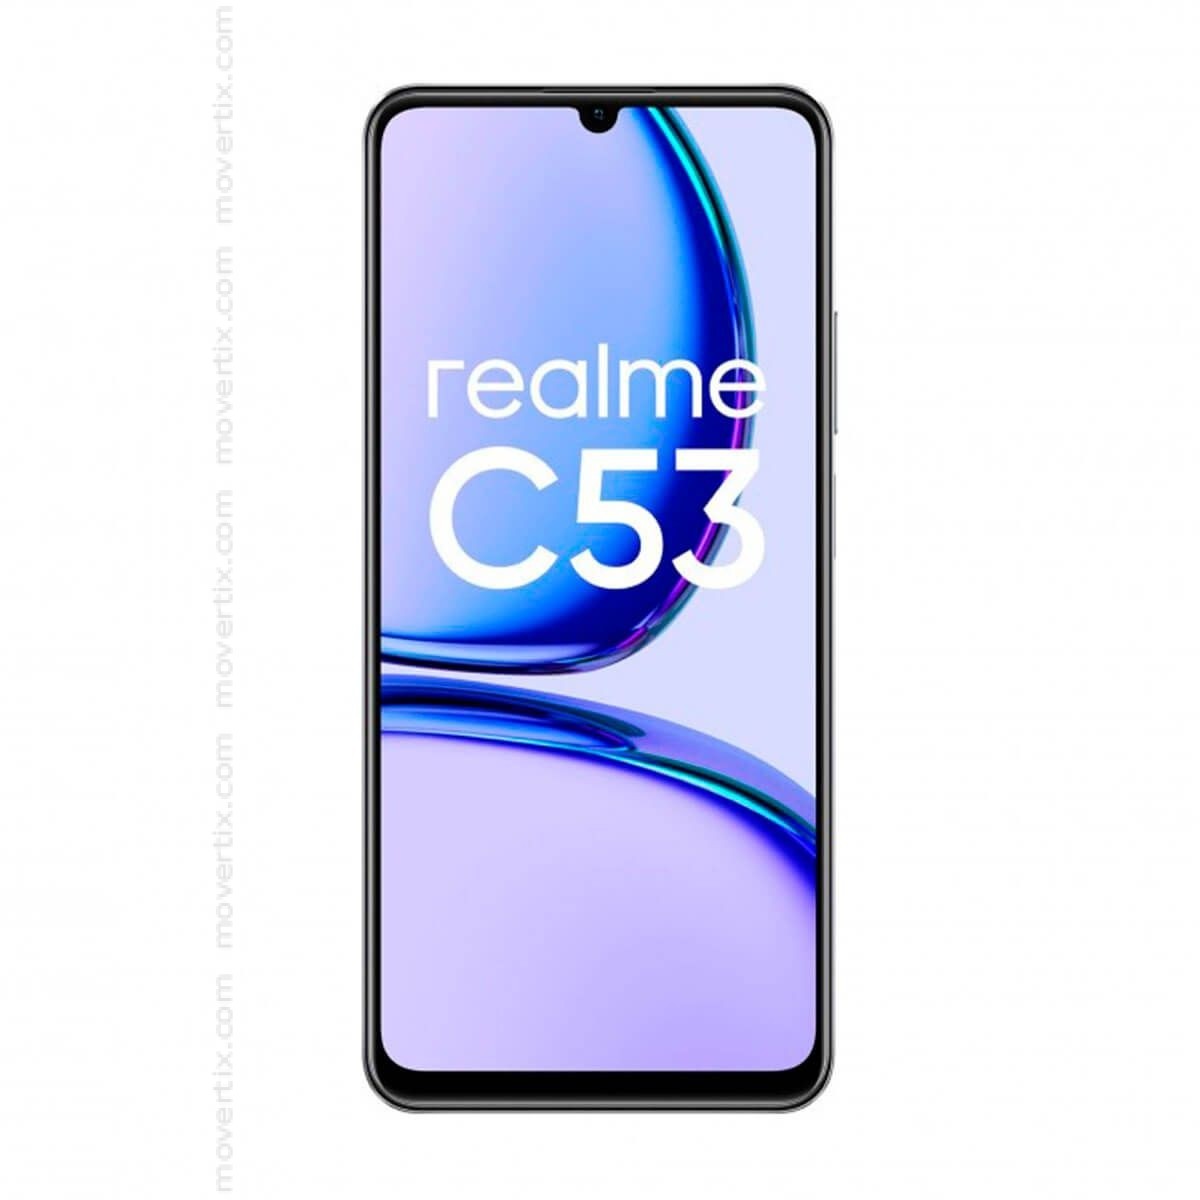 Realme C53 review: cheap and cheerful 